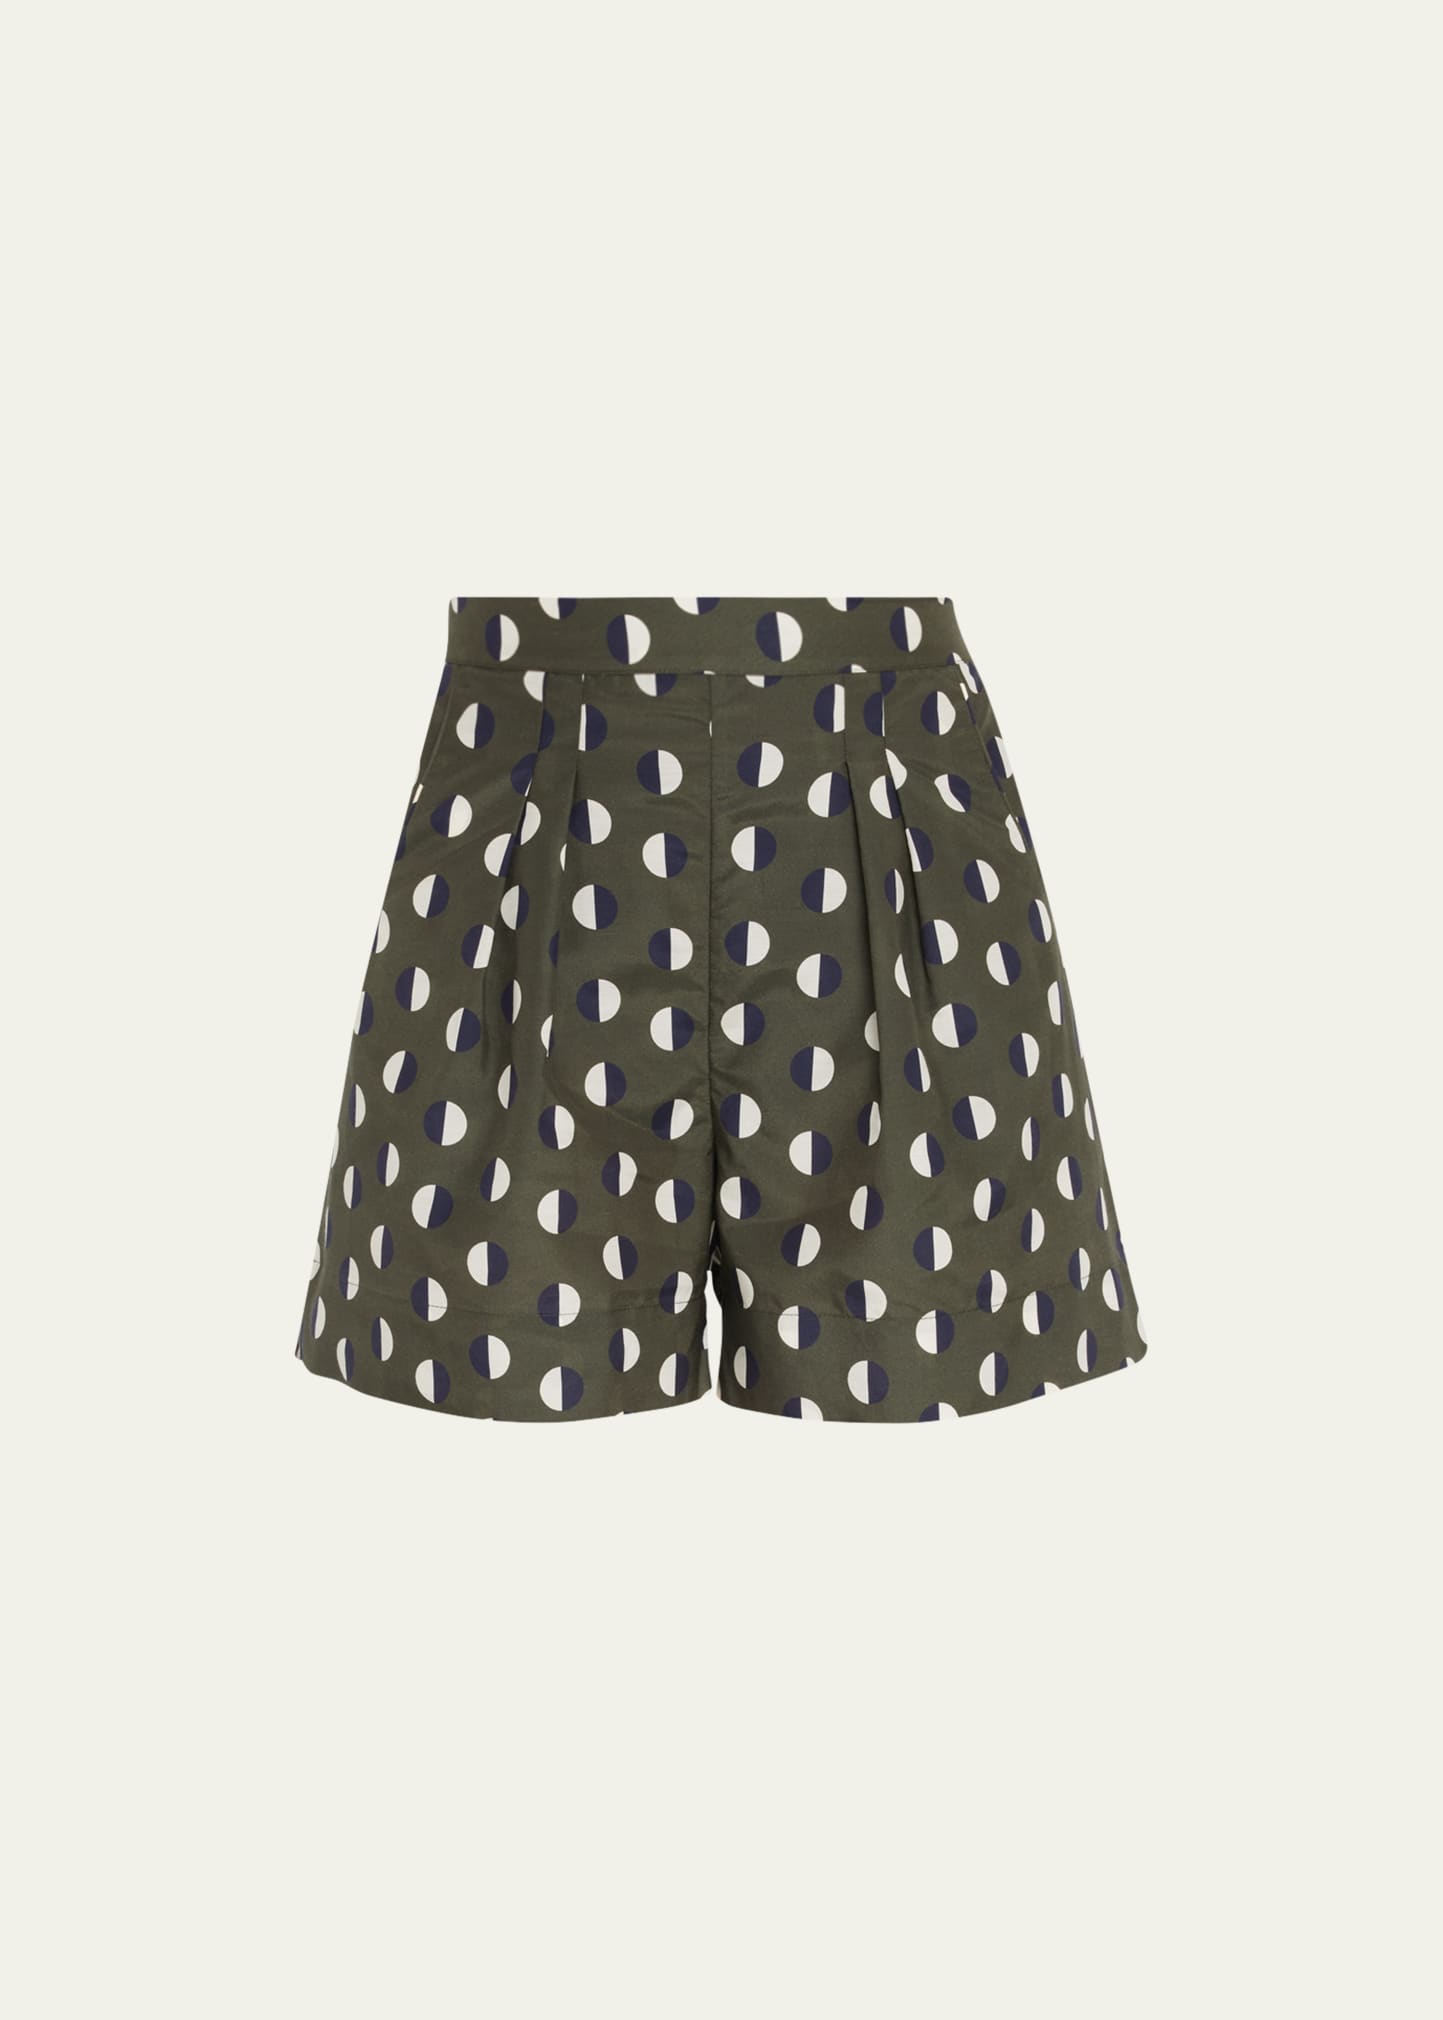 Eres Mercure Pleated Shorts In Lune Olive Noire